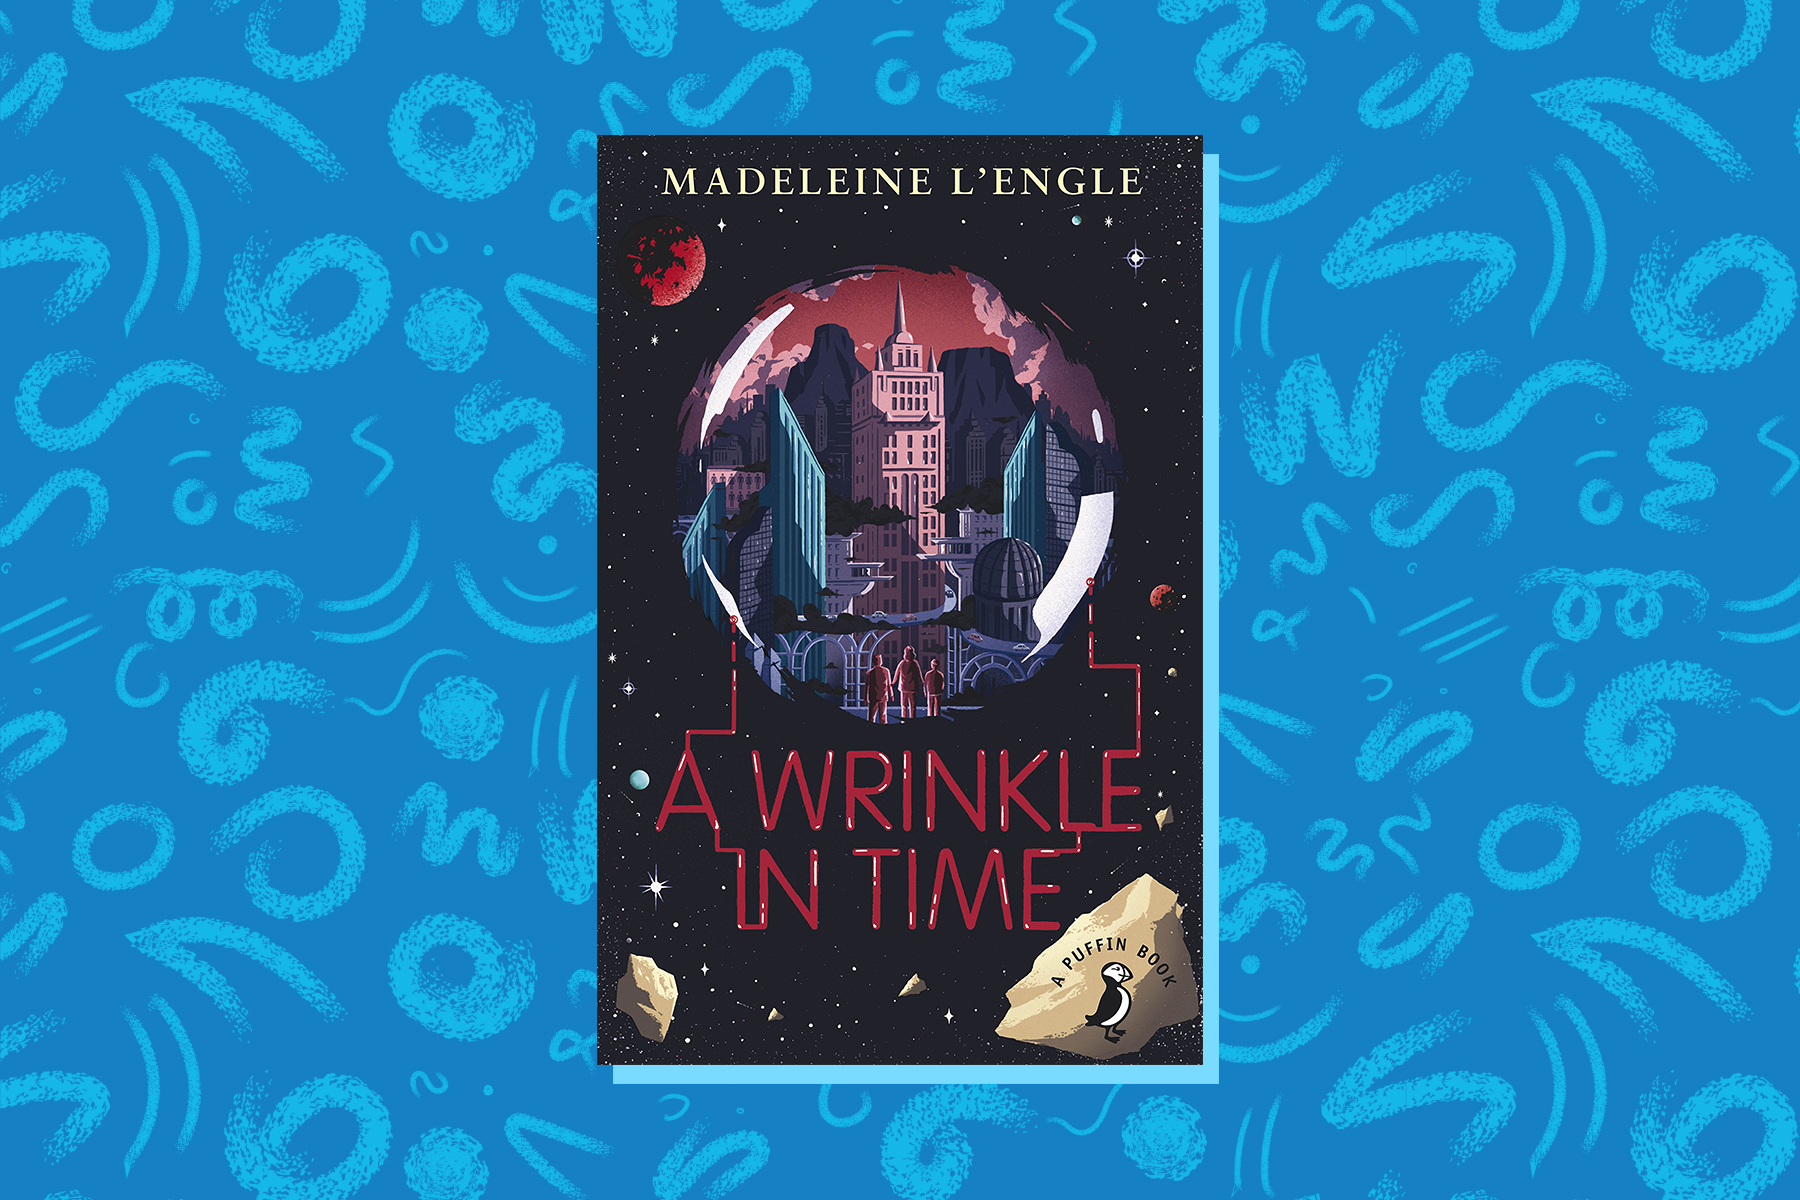 An image of the front cover of the book A Wrinkle in Time on a blue doodle background